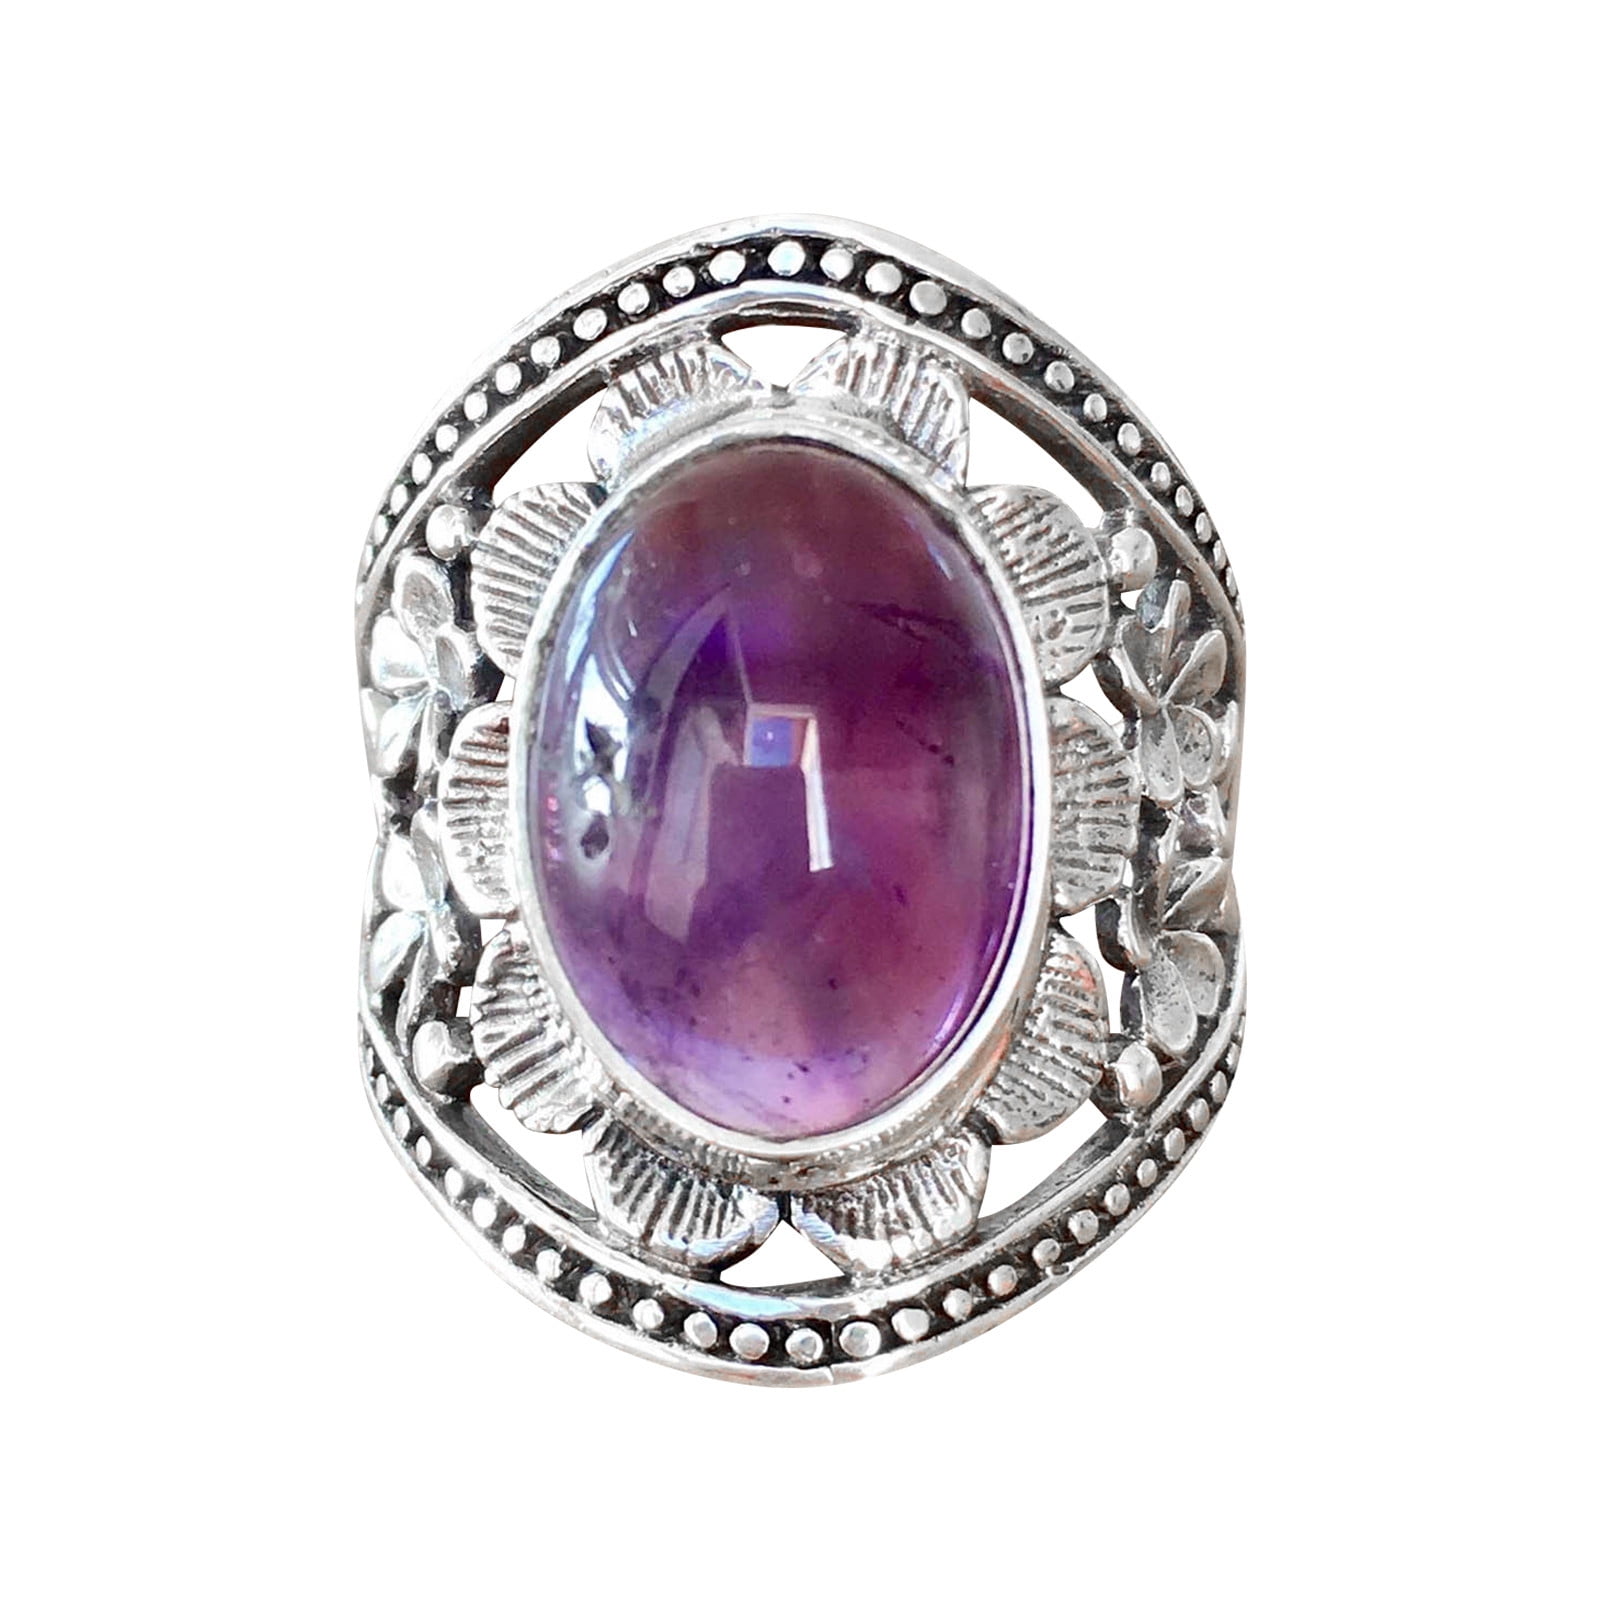 Amethyst Ring Ancient Silver Inlaid Retro Old Women's Men's Hand ...